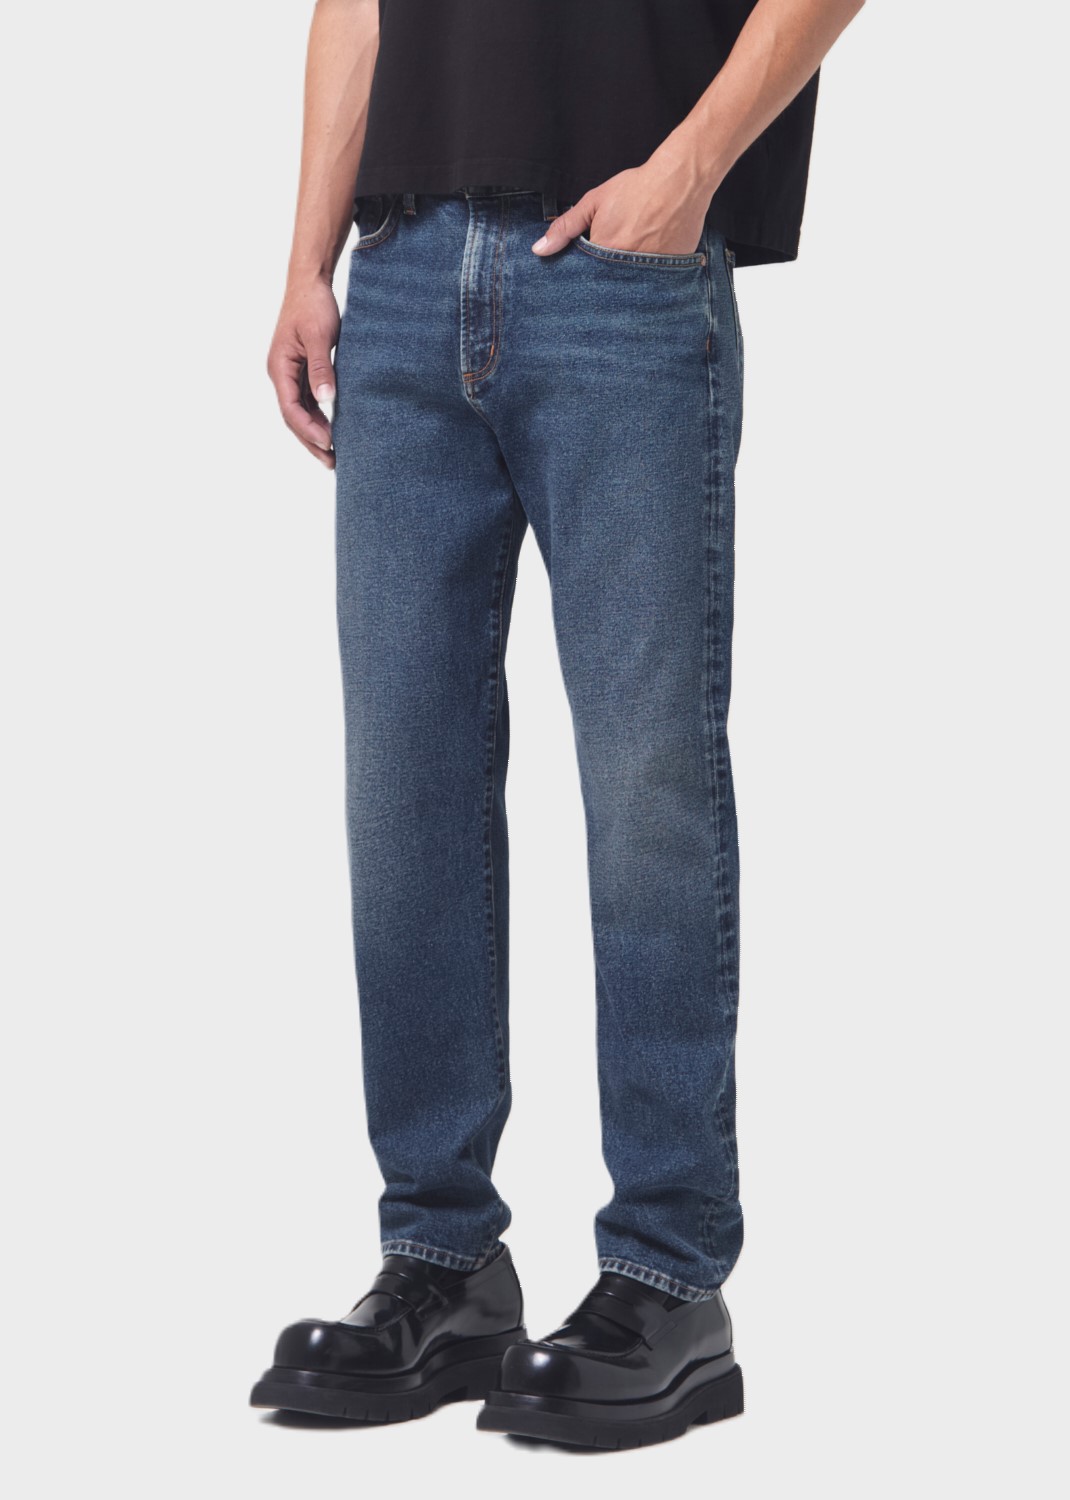 AGOLDE Curtis Jeans in Perimeter Wash